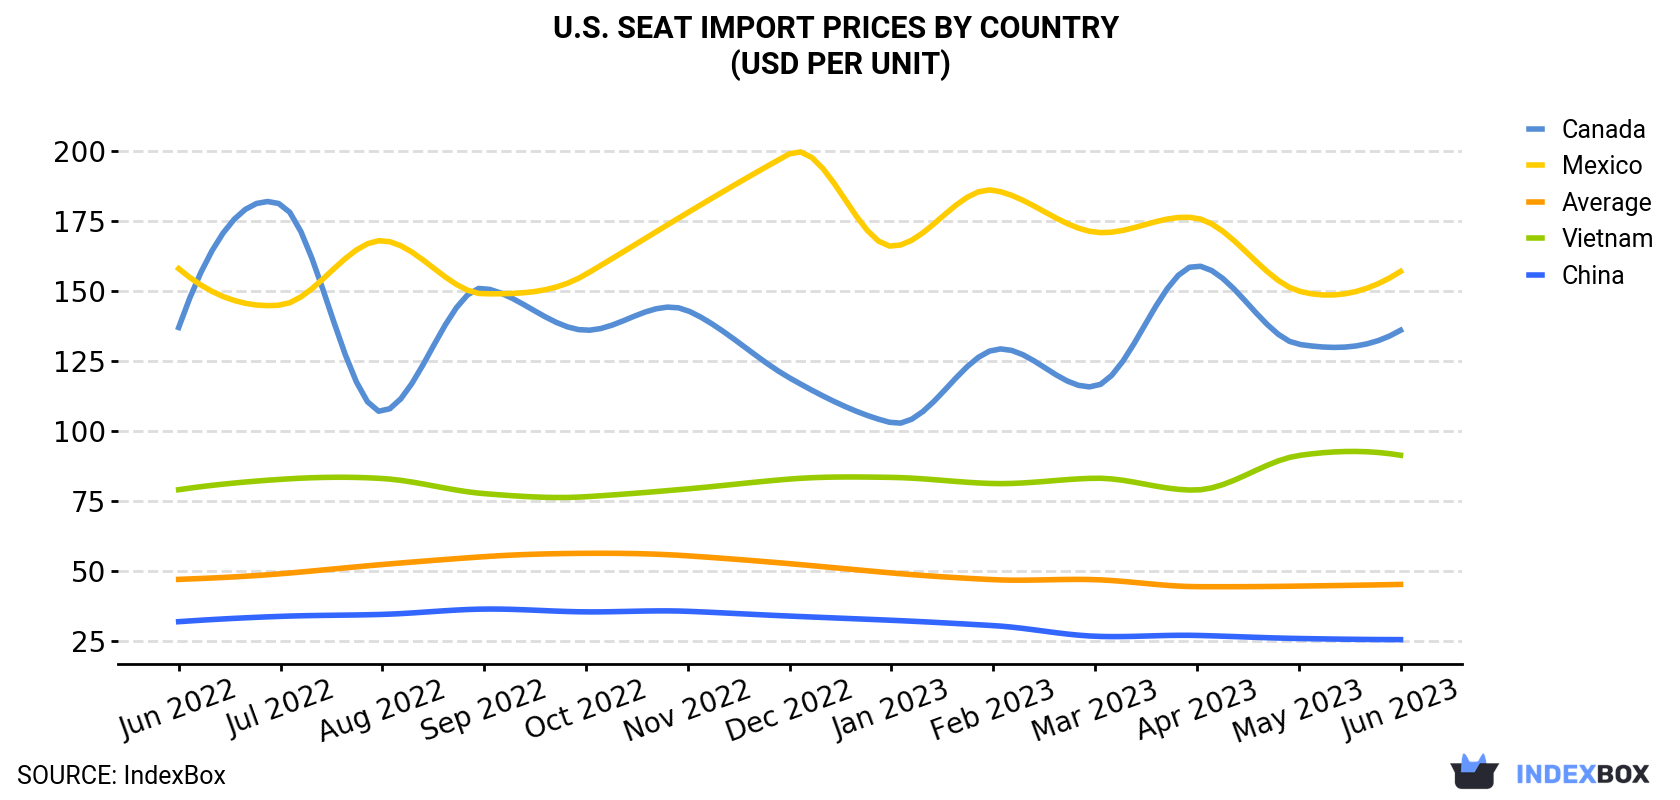 U.S. Seat Import Prices By Country (USD Per Unit)